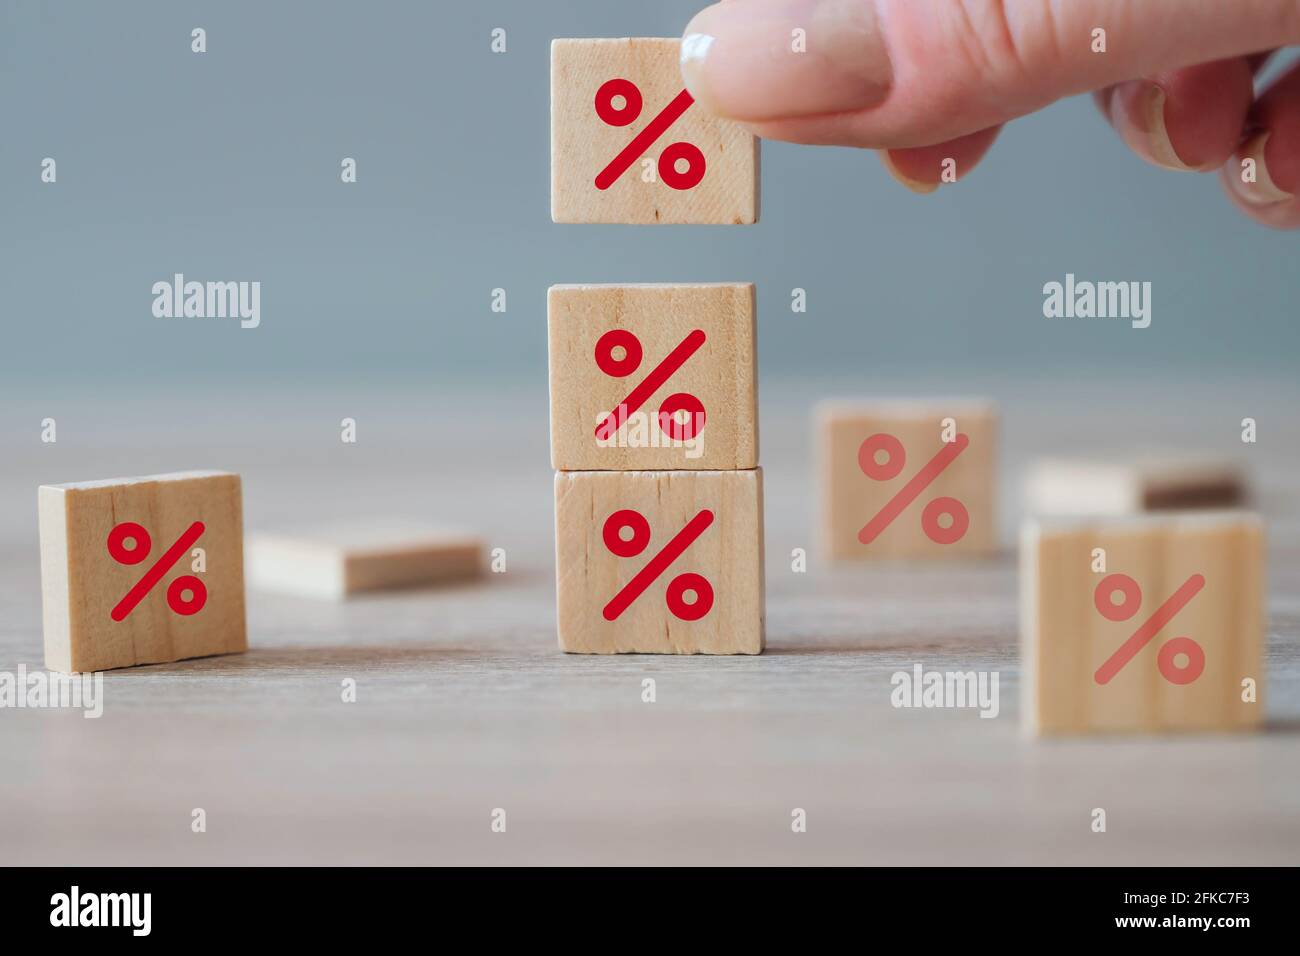 Hand choosing wooden cube block with percentage icon symbol. Interest rate financial and mortgage rates concept. Discount symbol on wooden blocks Stock Photo